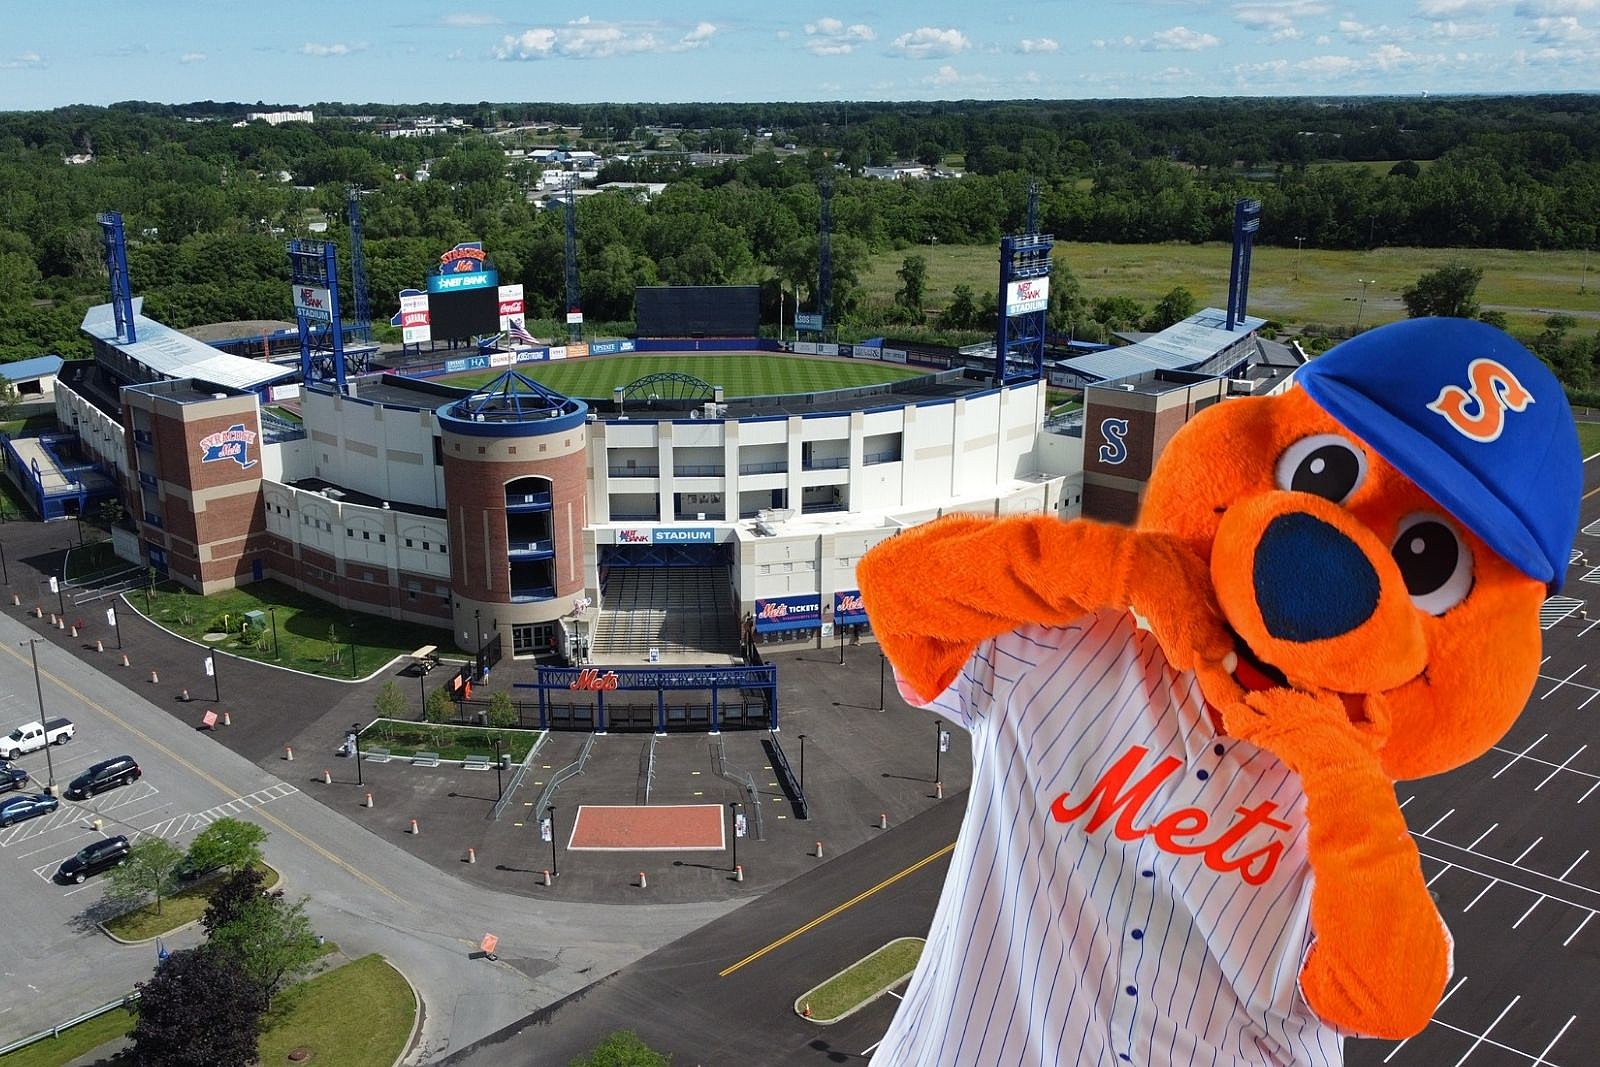 Syracuse Mets' opening day was a memorable one